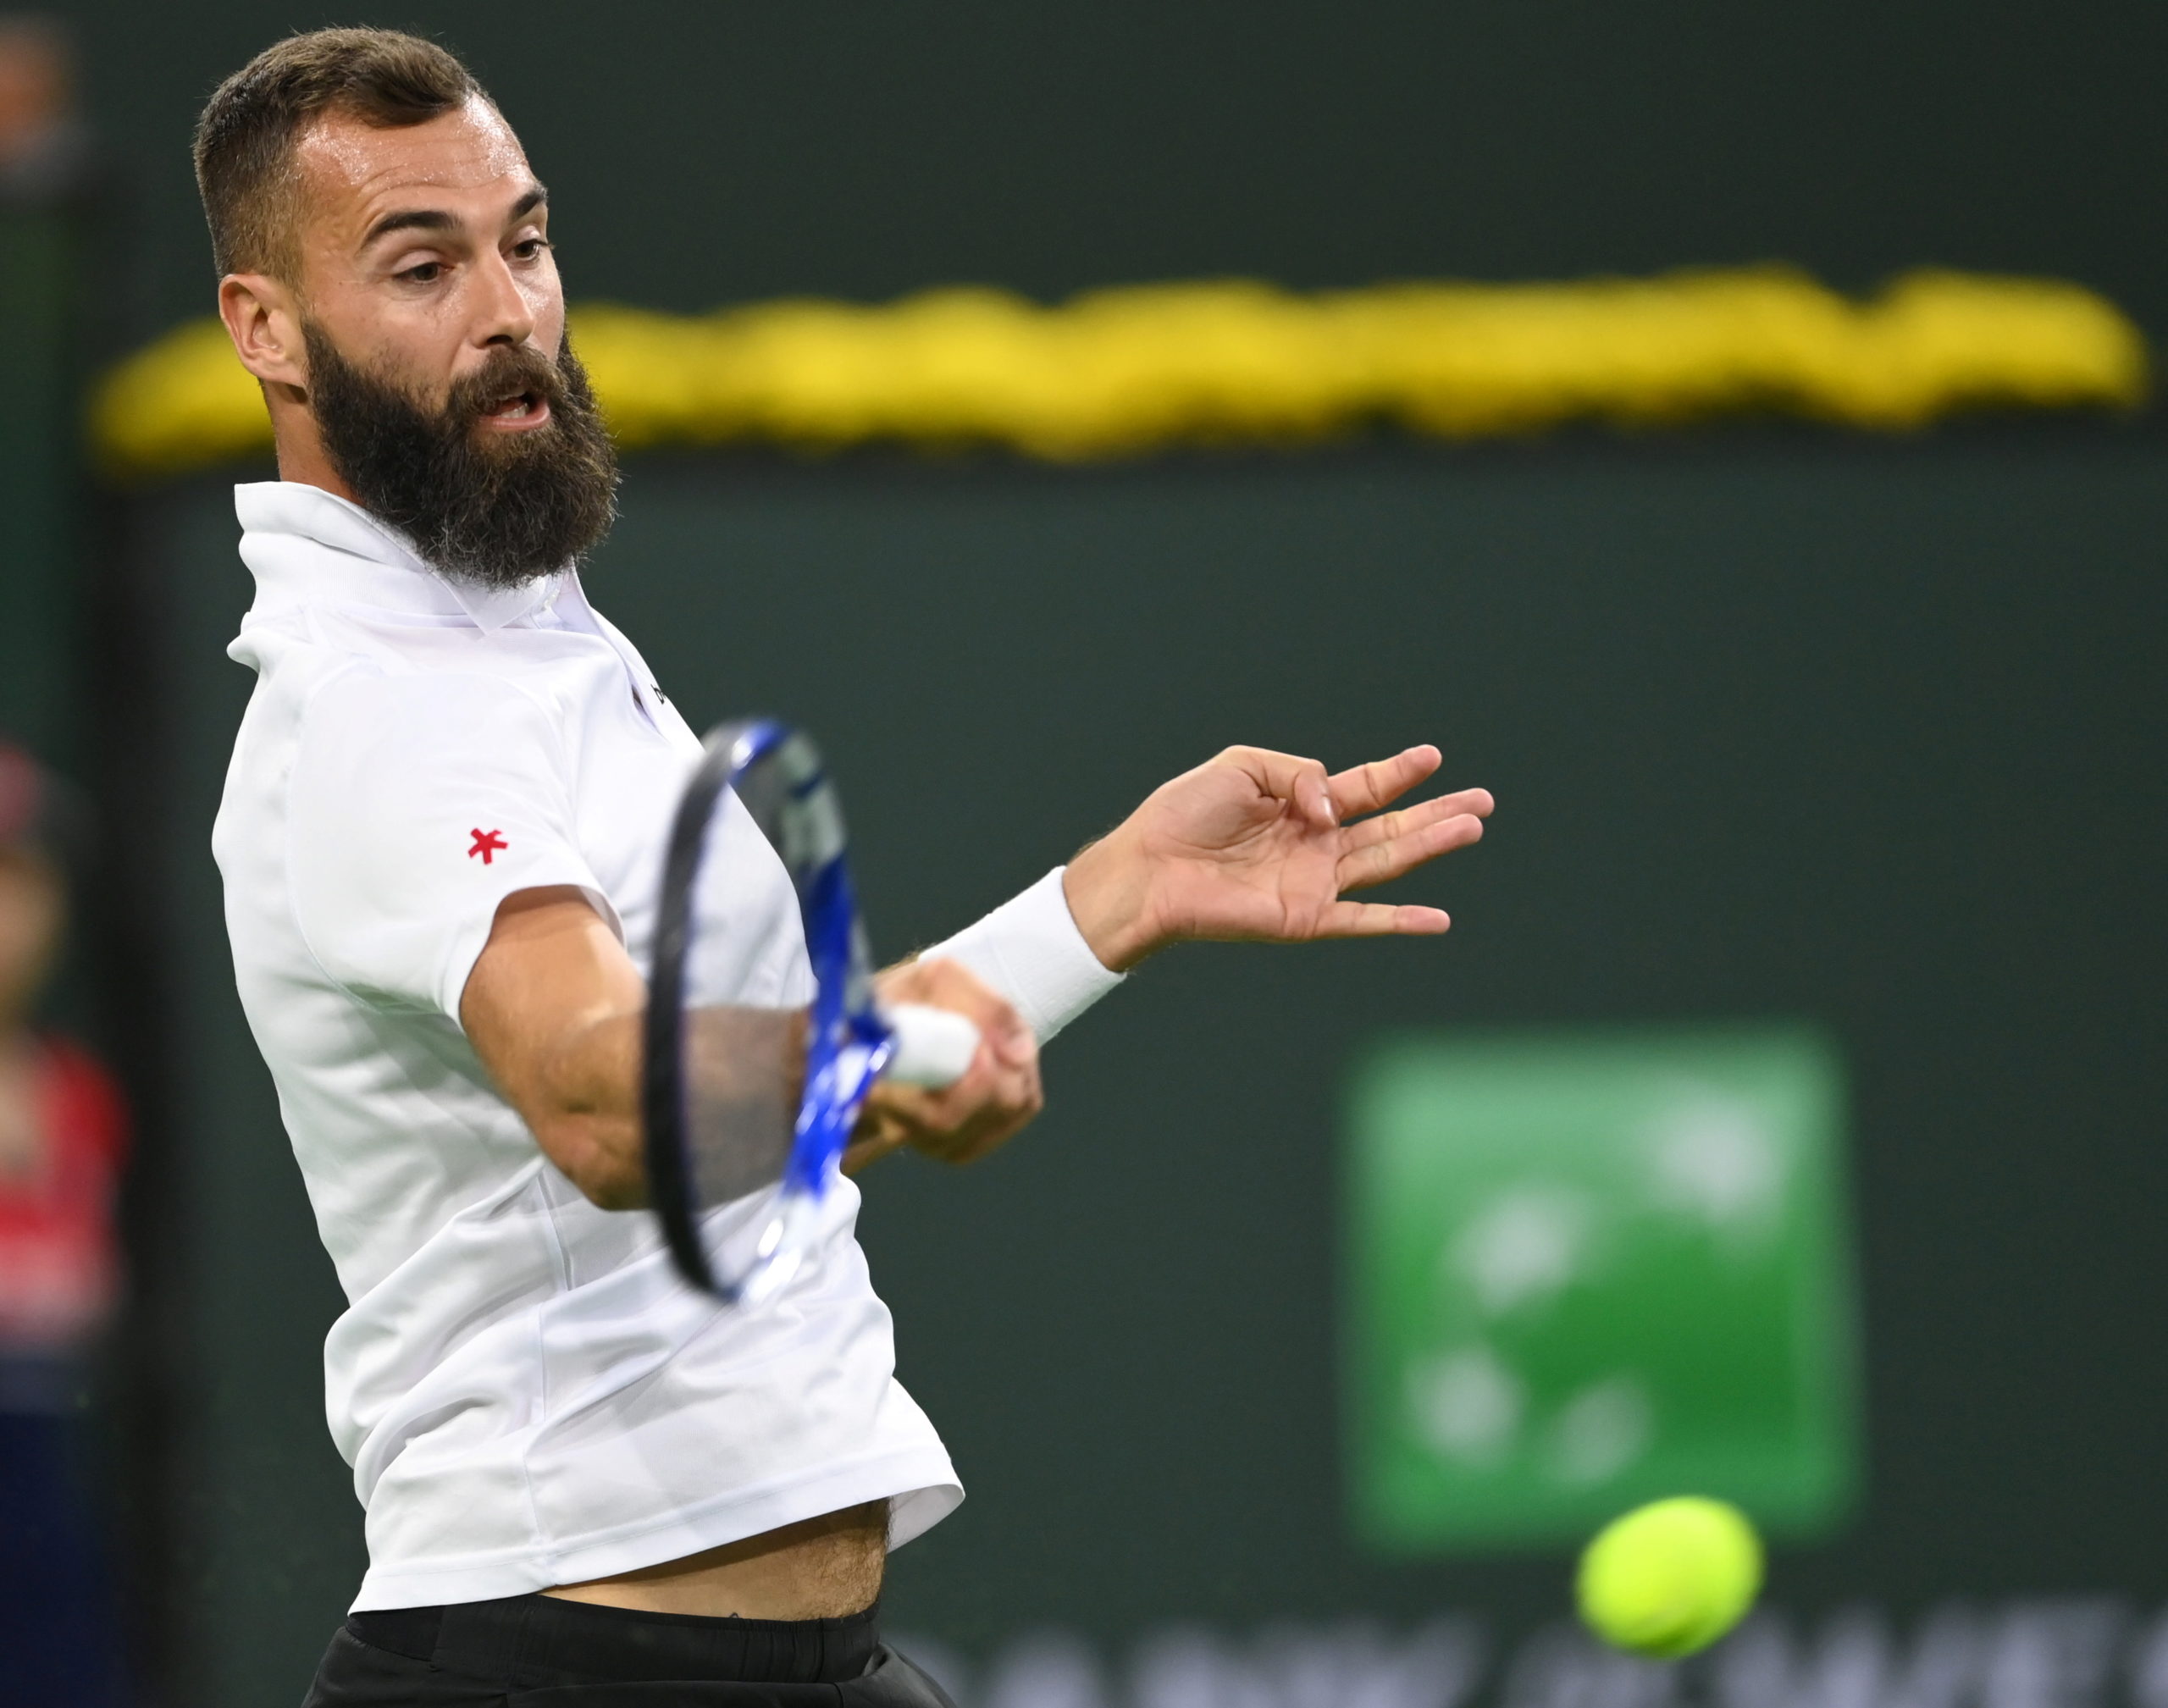 Benoit Paire (FRA) hits a shot during his first round match against Frances Tiafoe (USA) in the BNP Paribas Open at the Indian Wells Tennis Garden